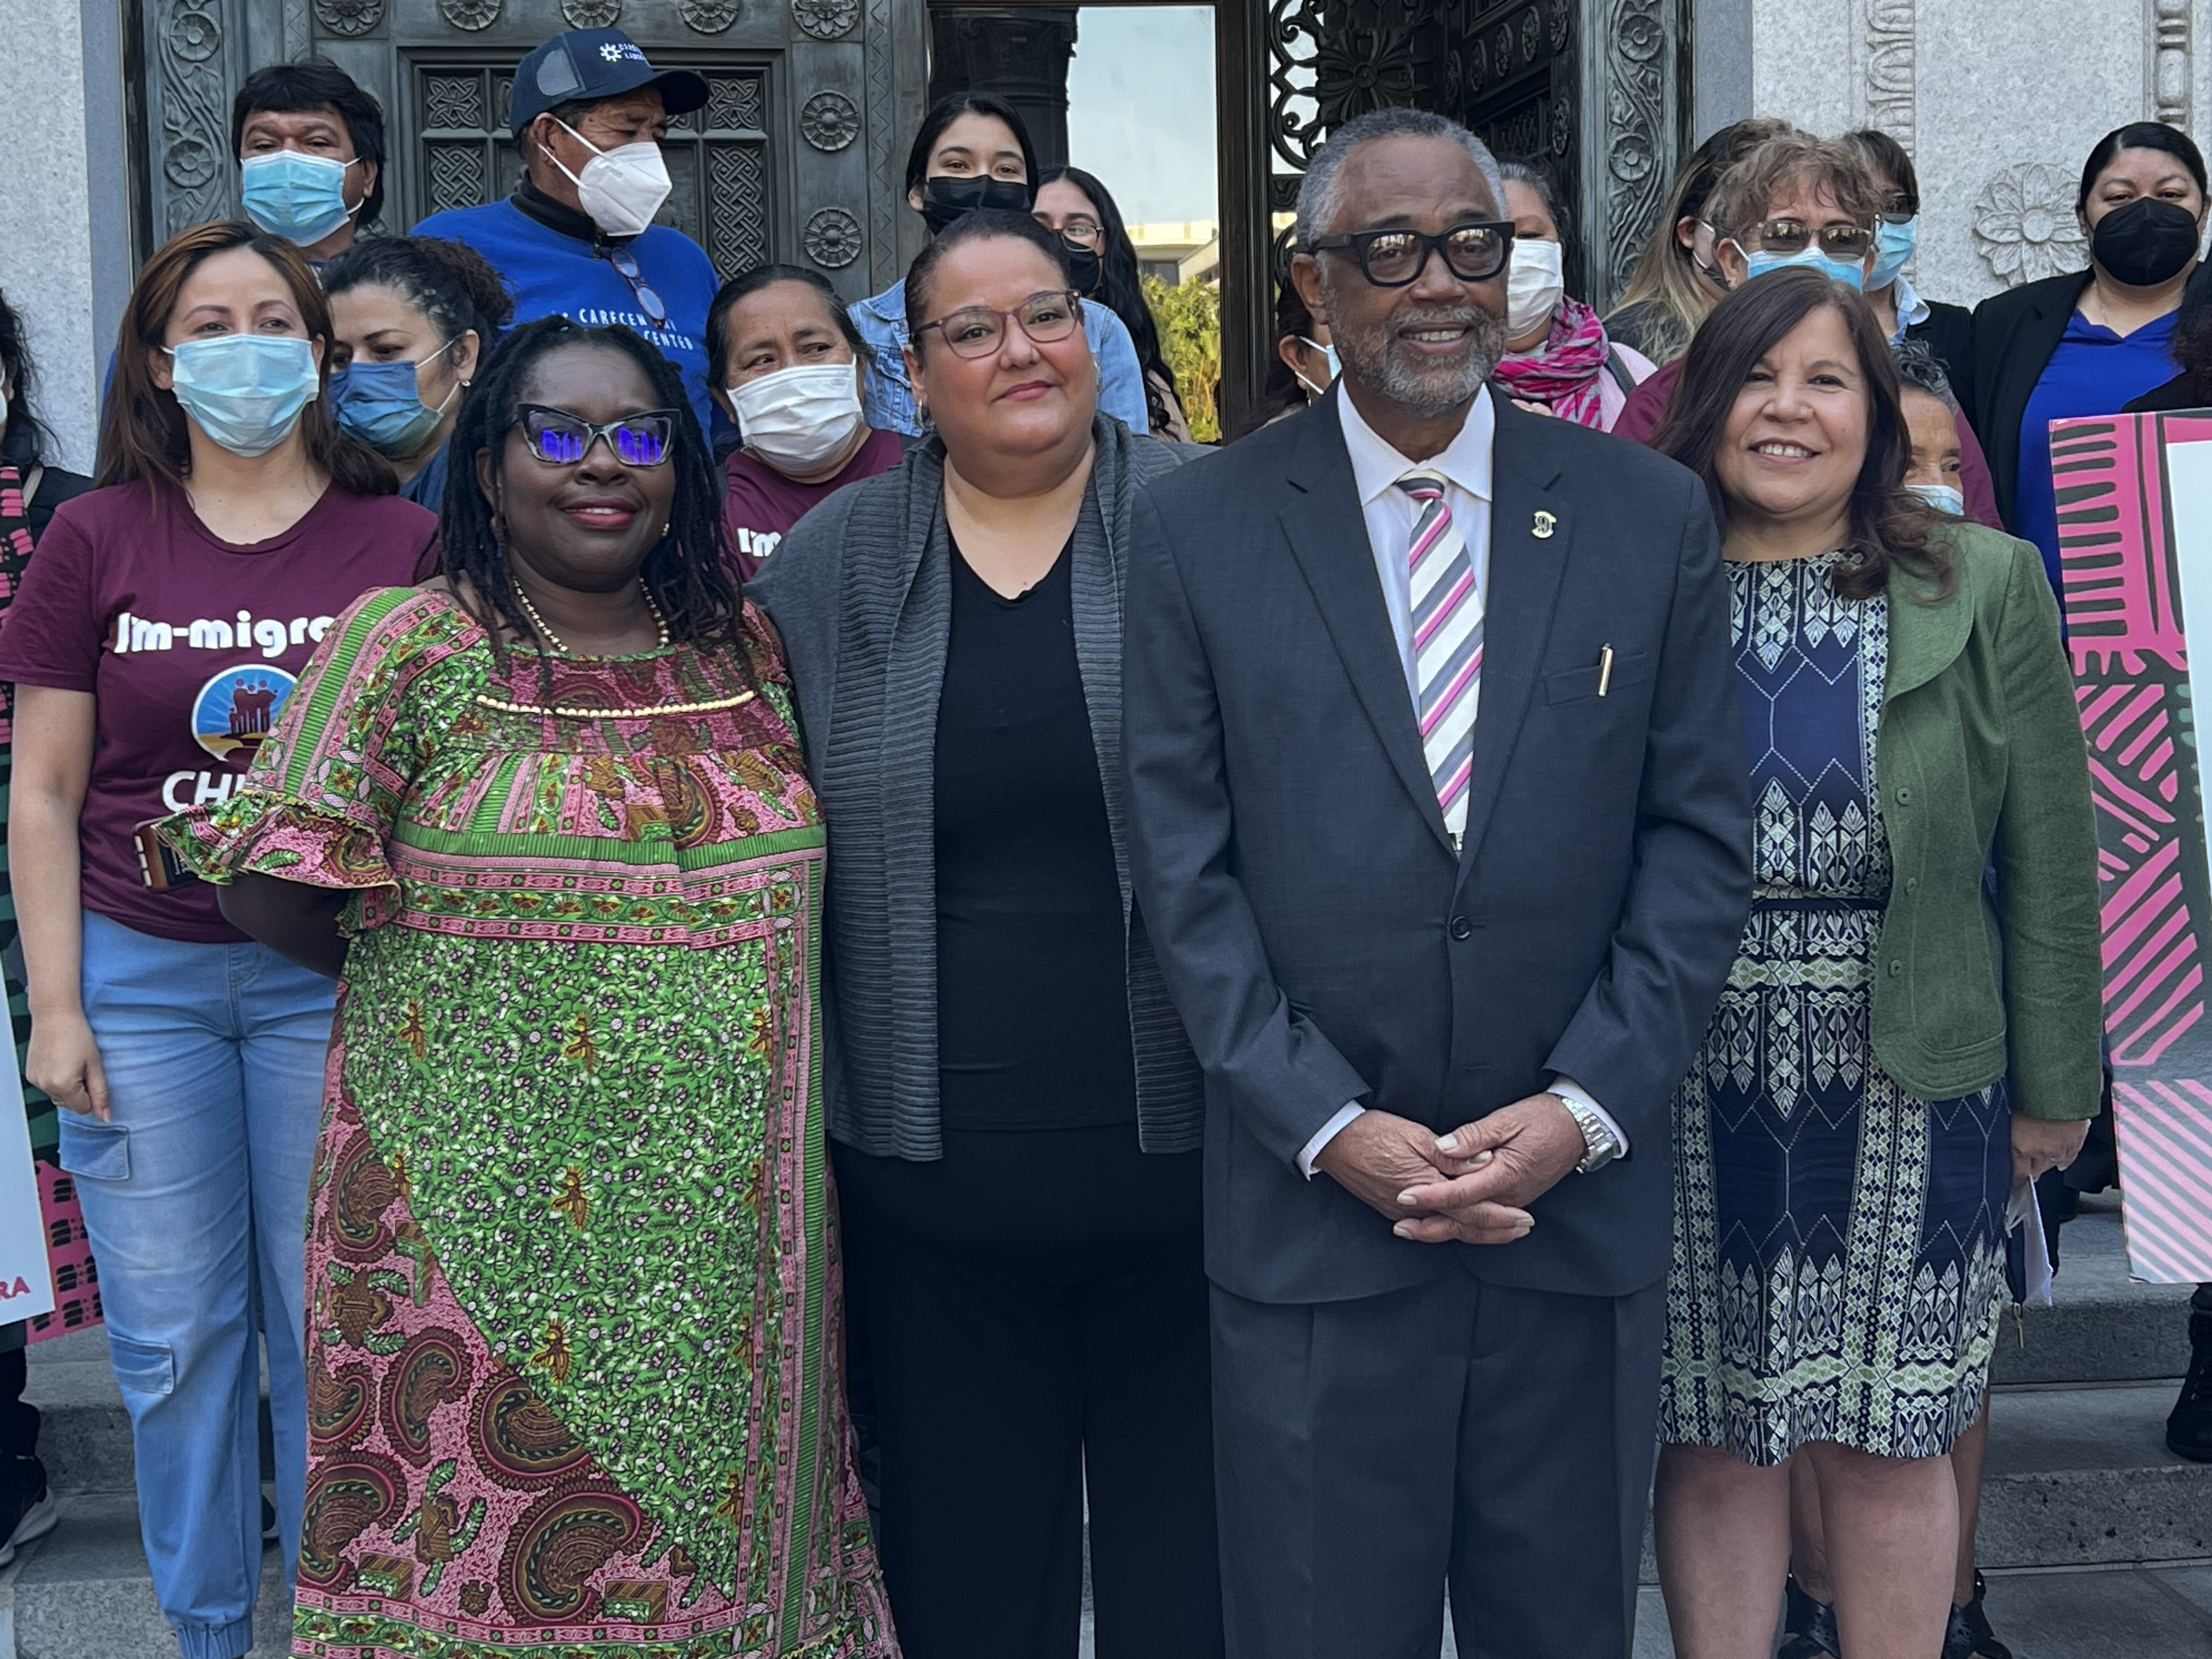 (l to r) BAJI Director Nana Gyamfi, CARECEN Director Martha Arevalo, Councilmember Curren Price Jr., and CHIRLA Director Angelica Salas pose with members at a ceremony to celebrate the allocation.